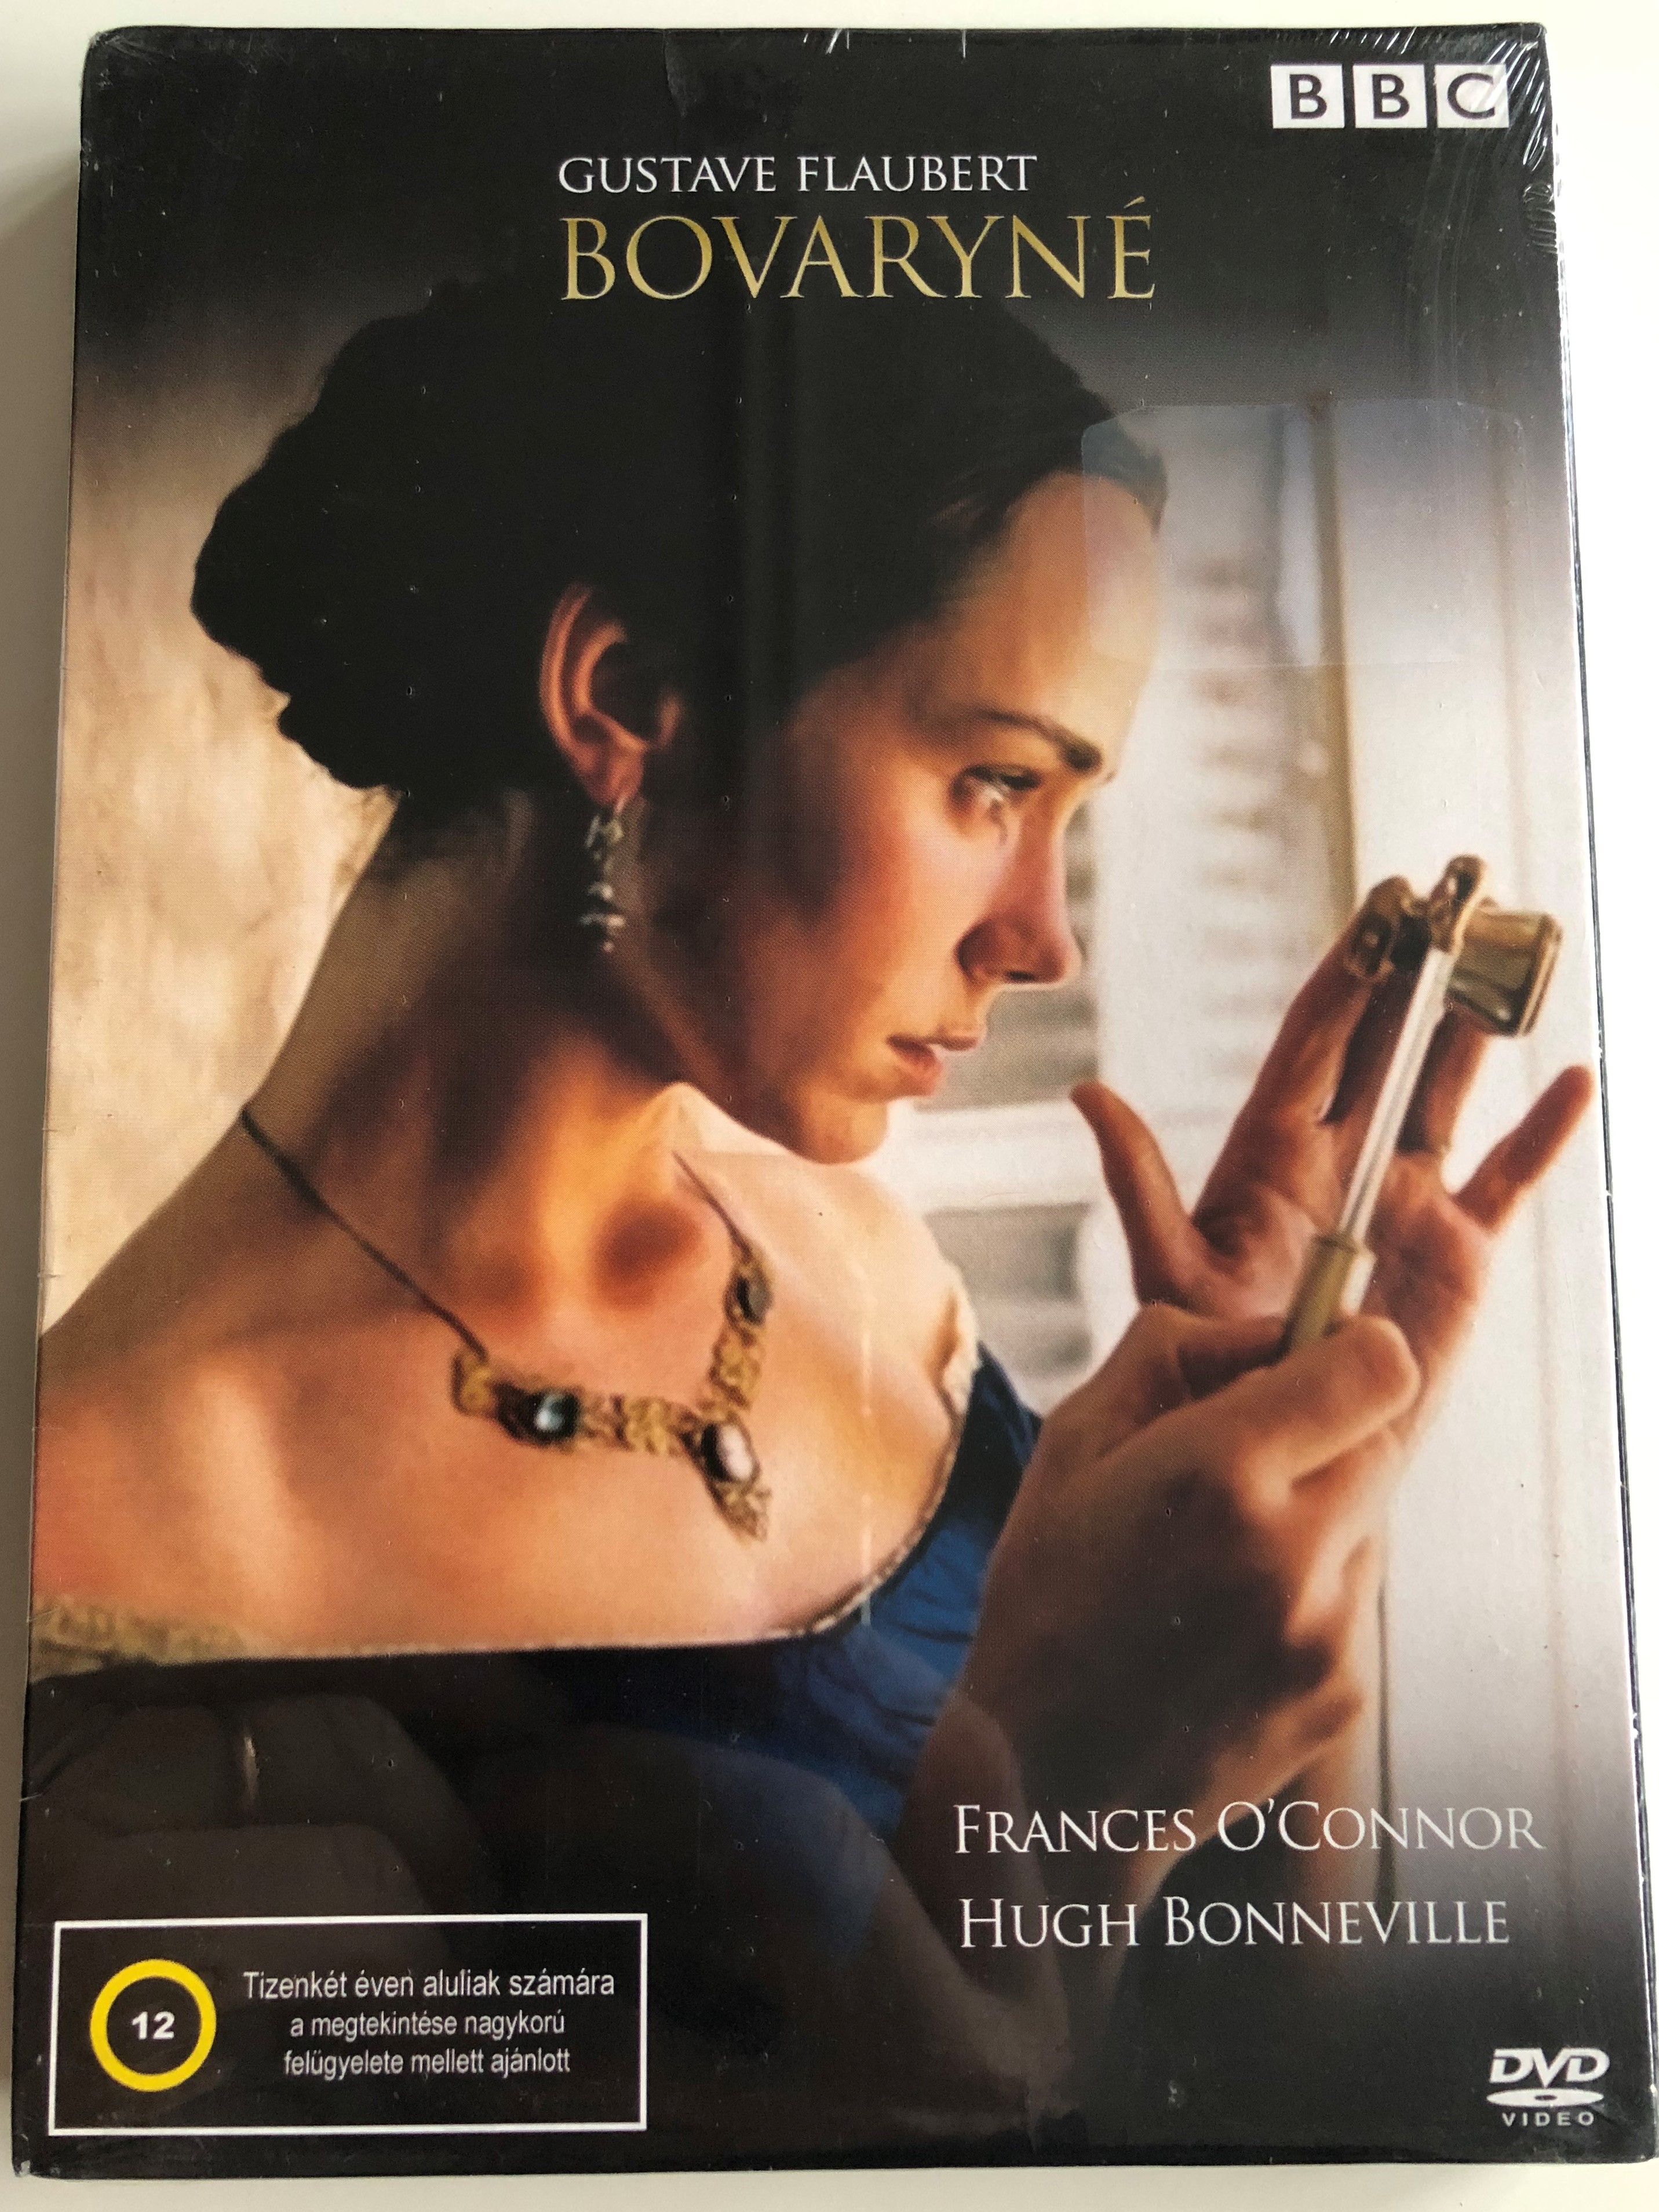 Gustave Flaubert: Madame Bovary DVD 2000 Bovaryné / BBC miniseries /  Directed by Tim Fywell / Starring: Frances O'Connor, Hugh Bonneville, Greg  Wise, Hugh Dancy - Bible in My Language